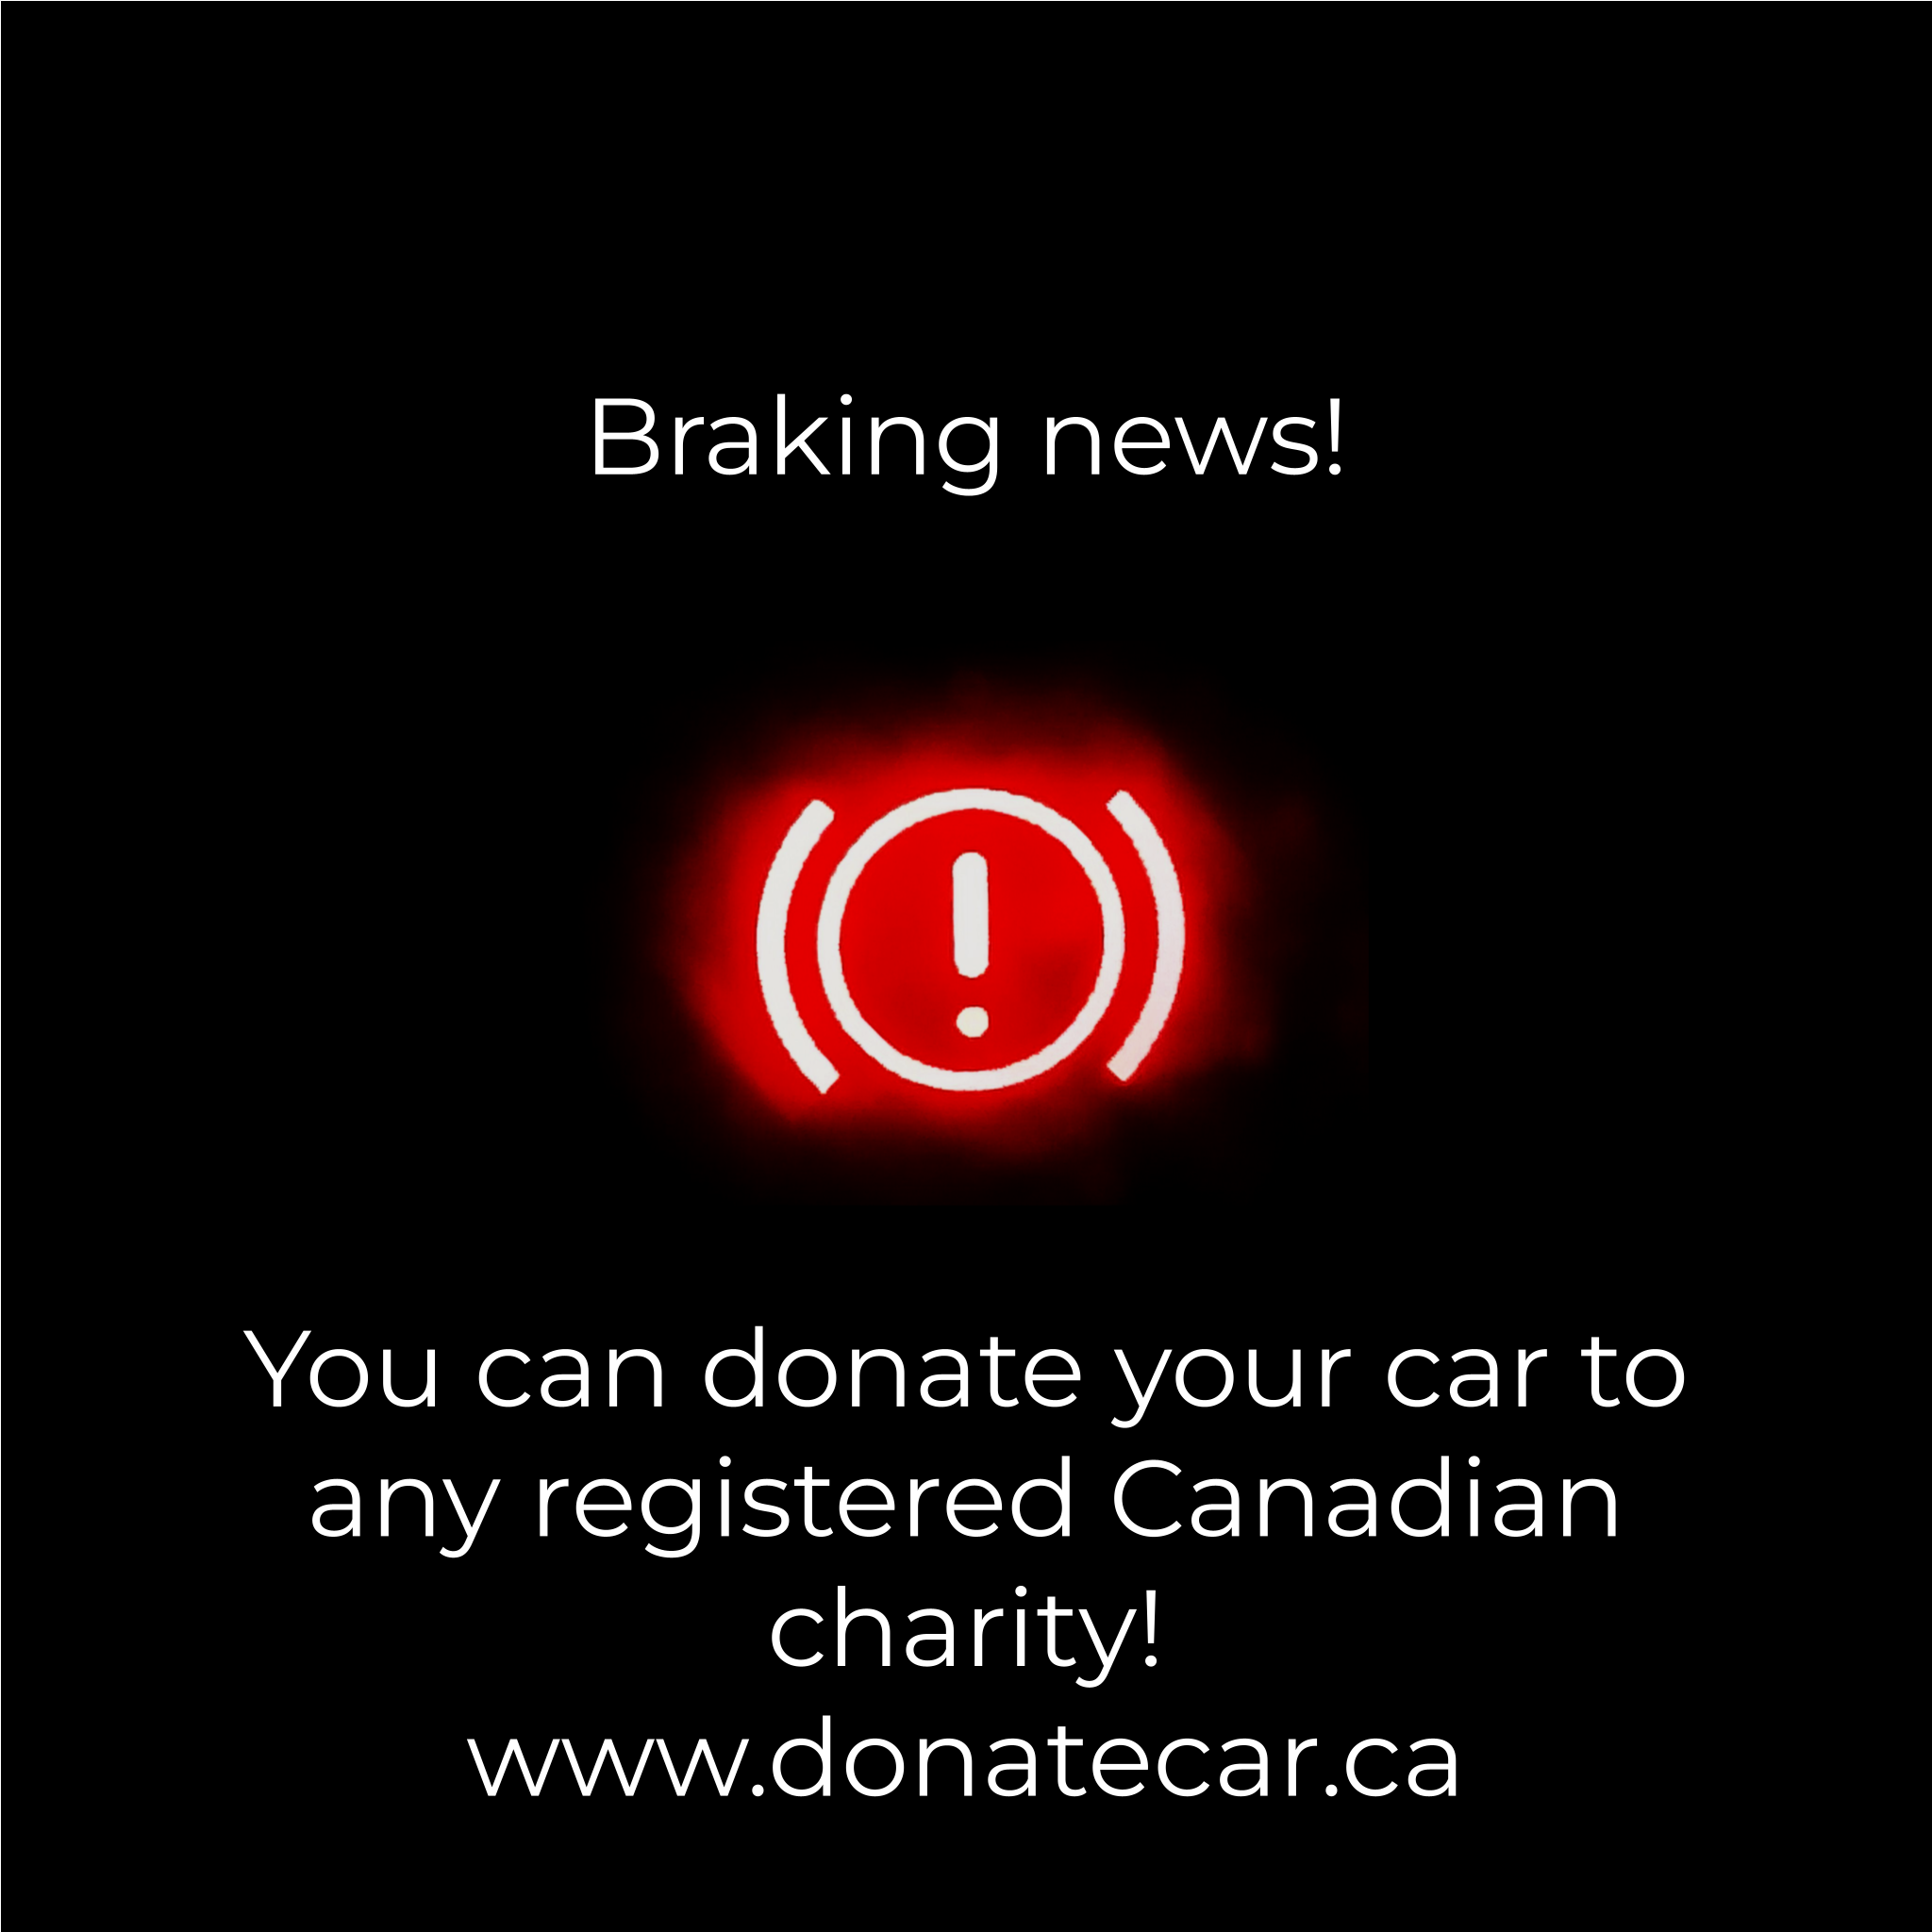 Neon red engine light on a black background text reads Braking news you can donate your car to an Canadian charity jeep donate a car canada